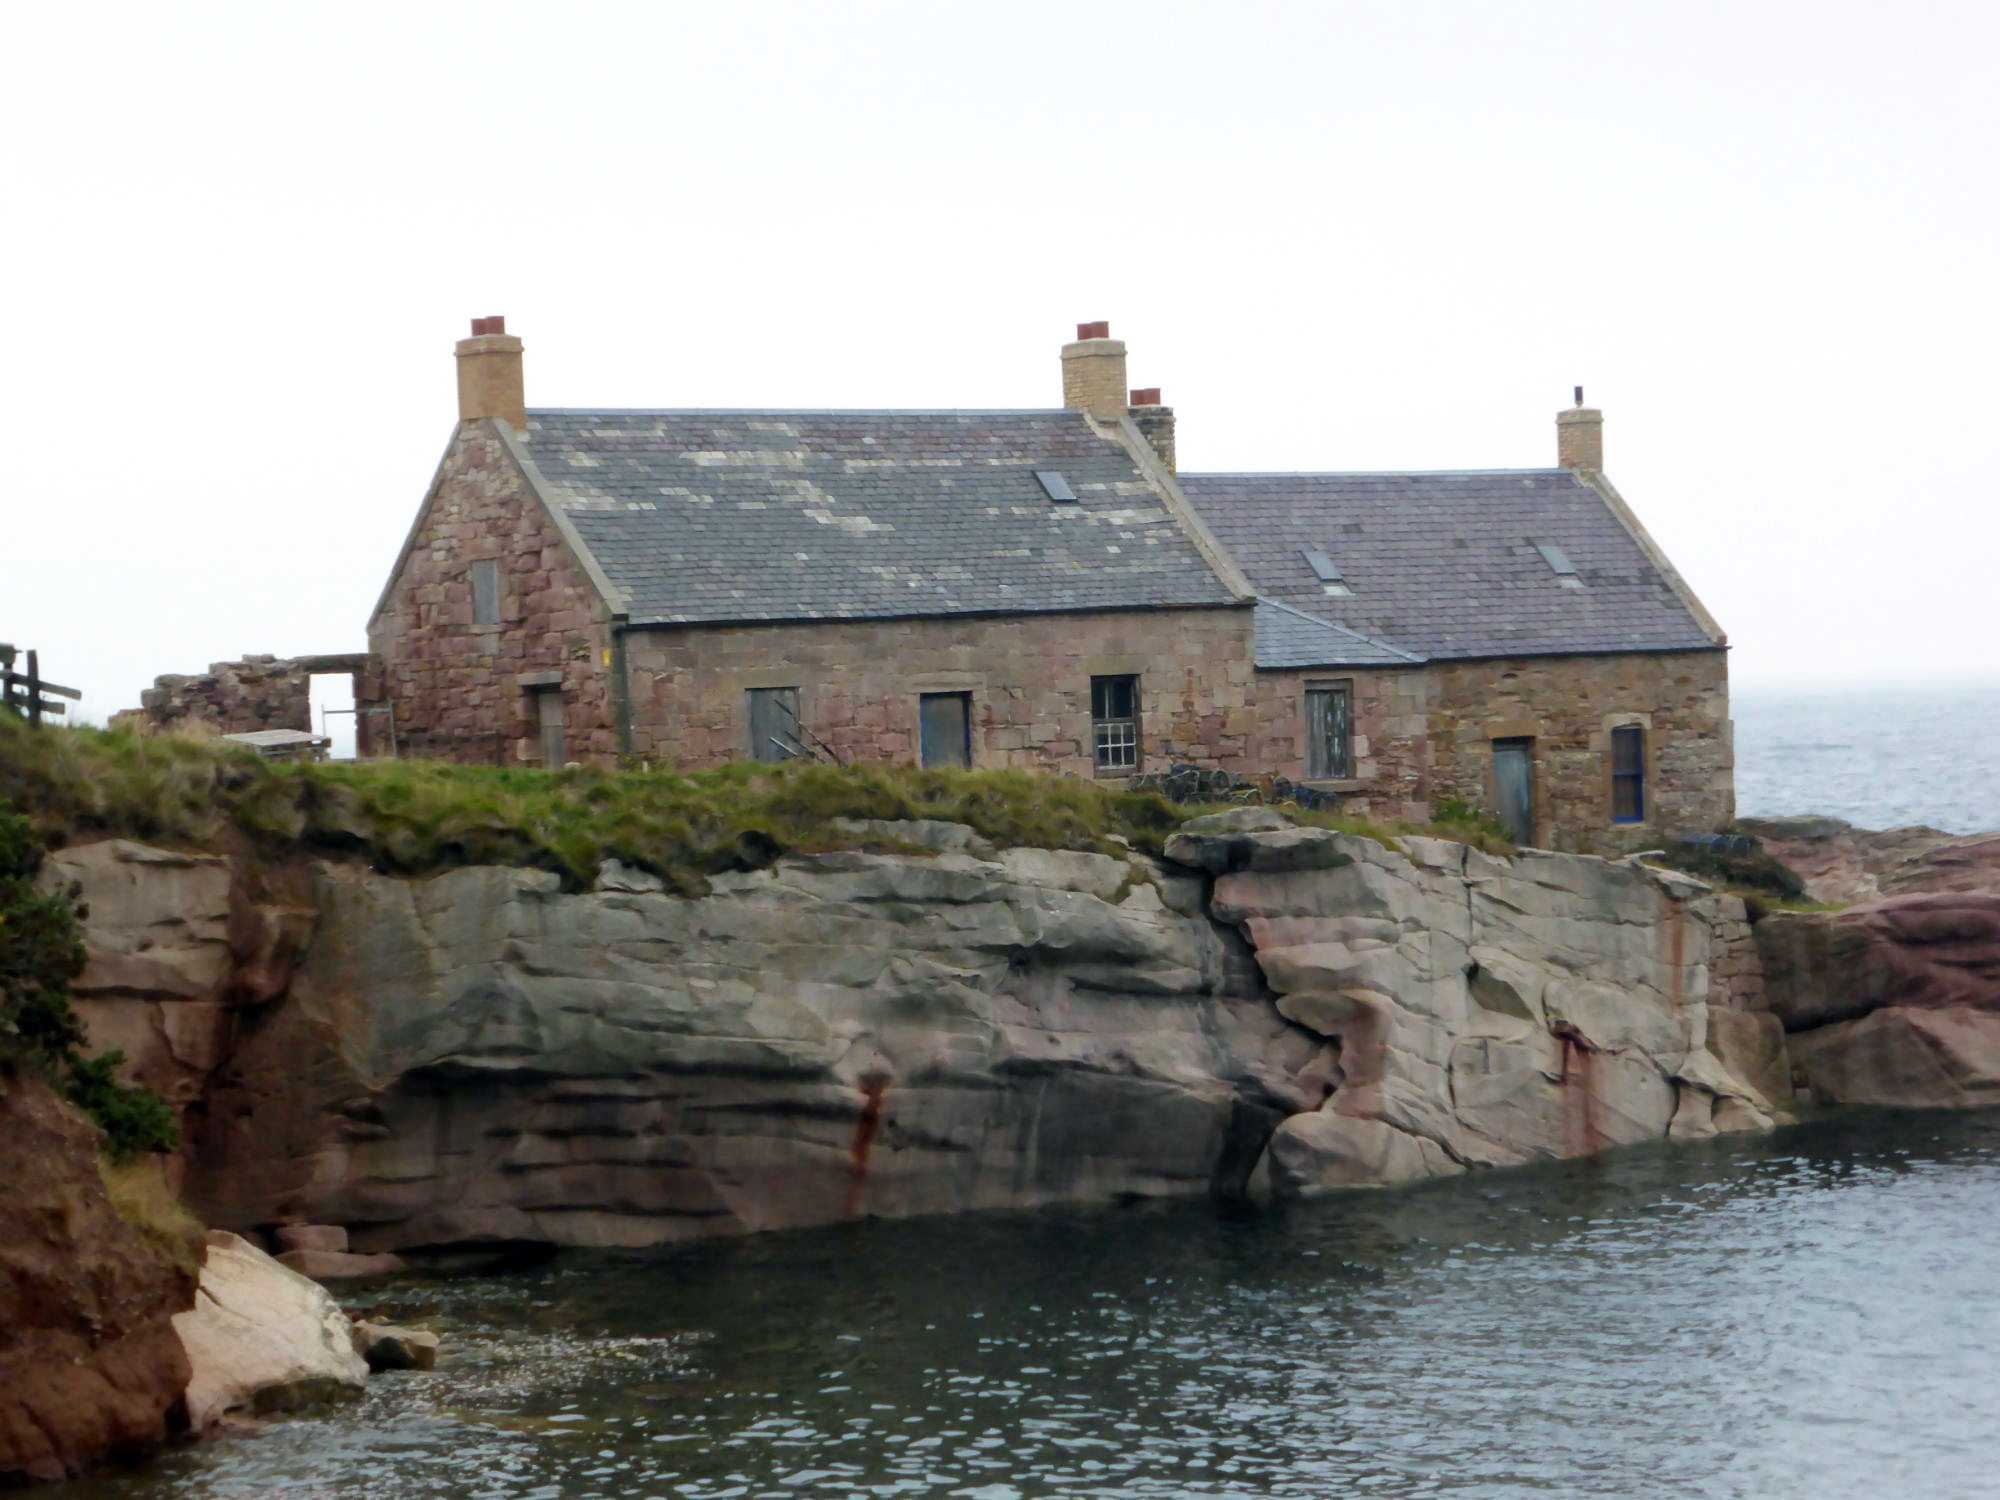 Harbour cottages, looking N